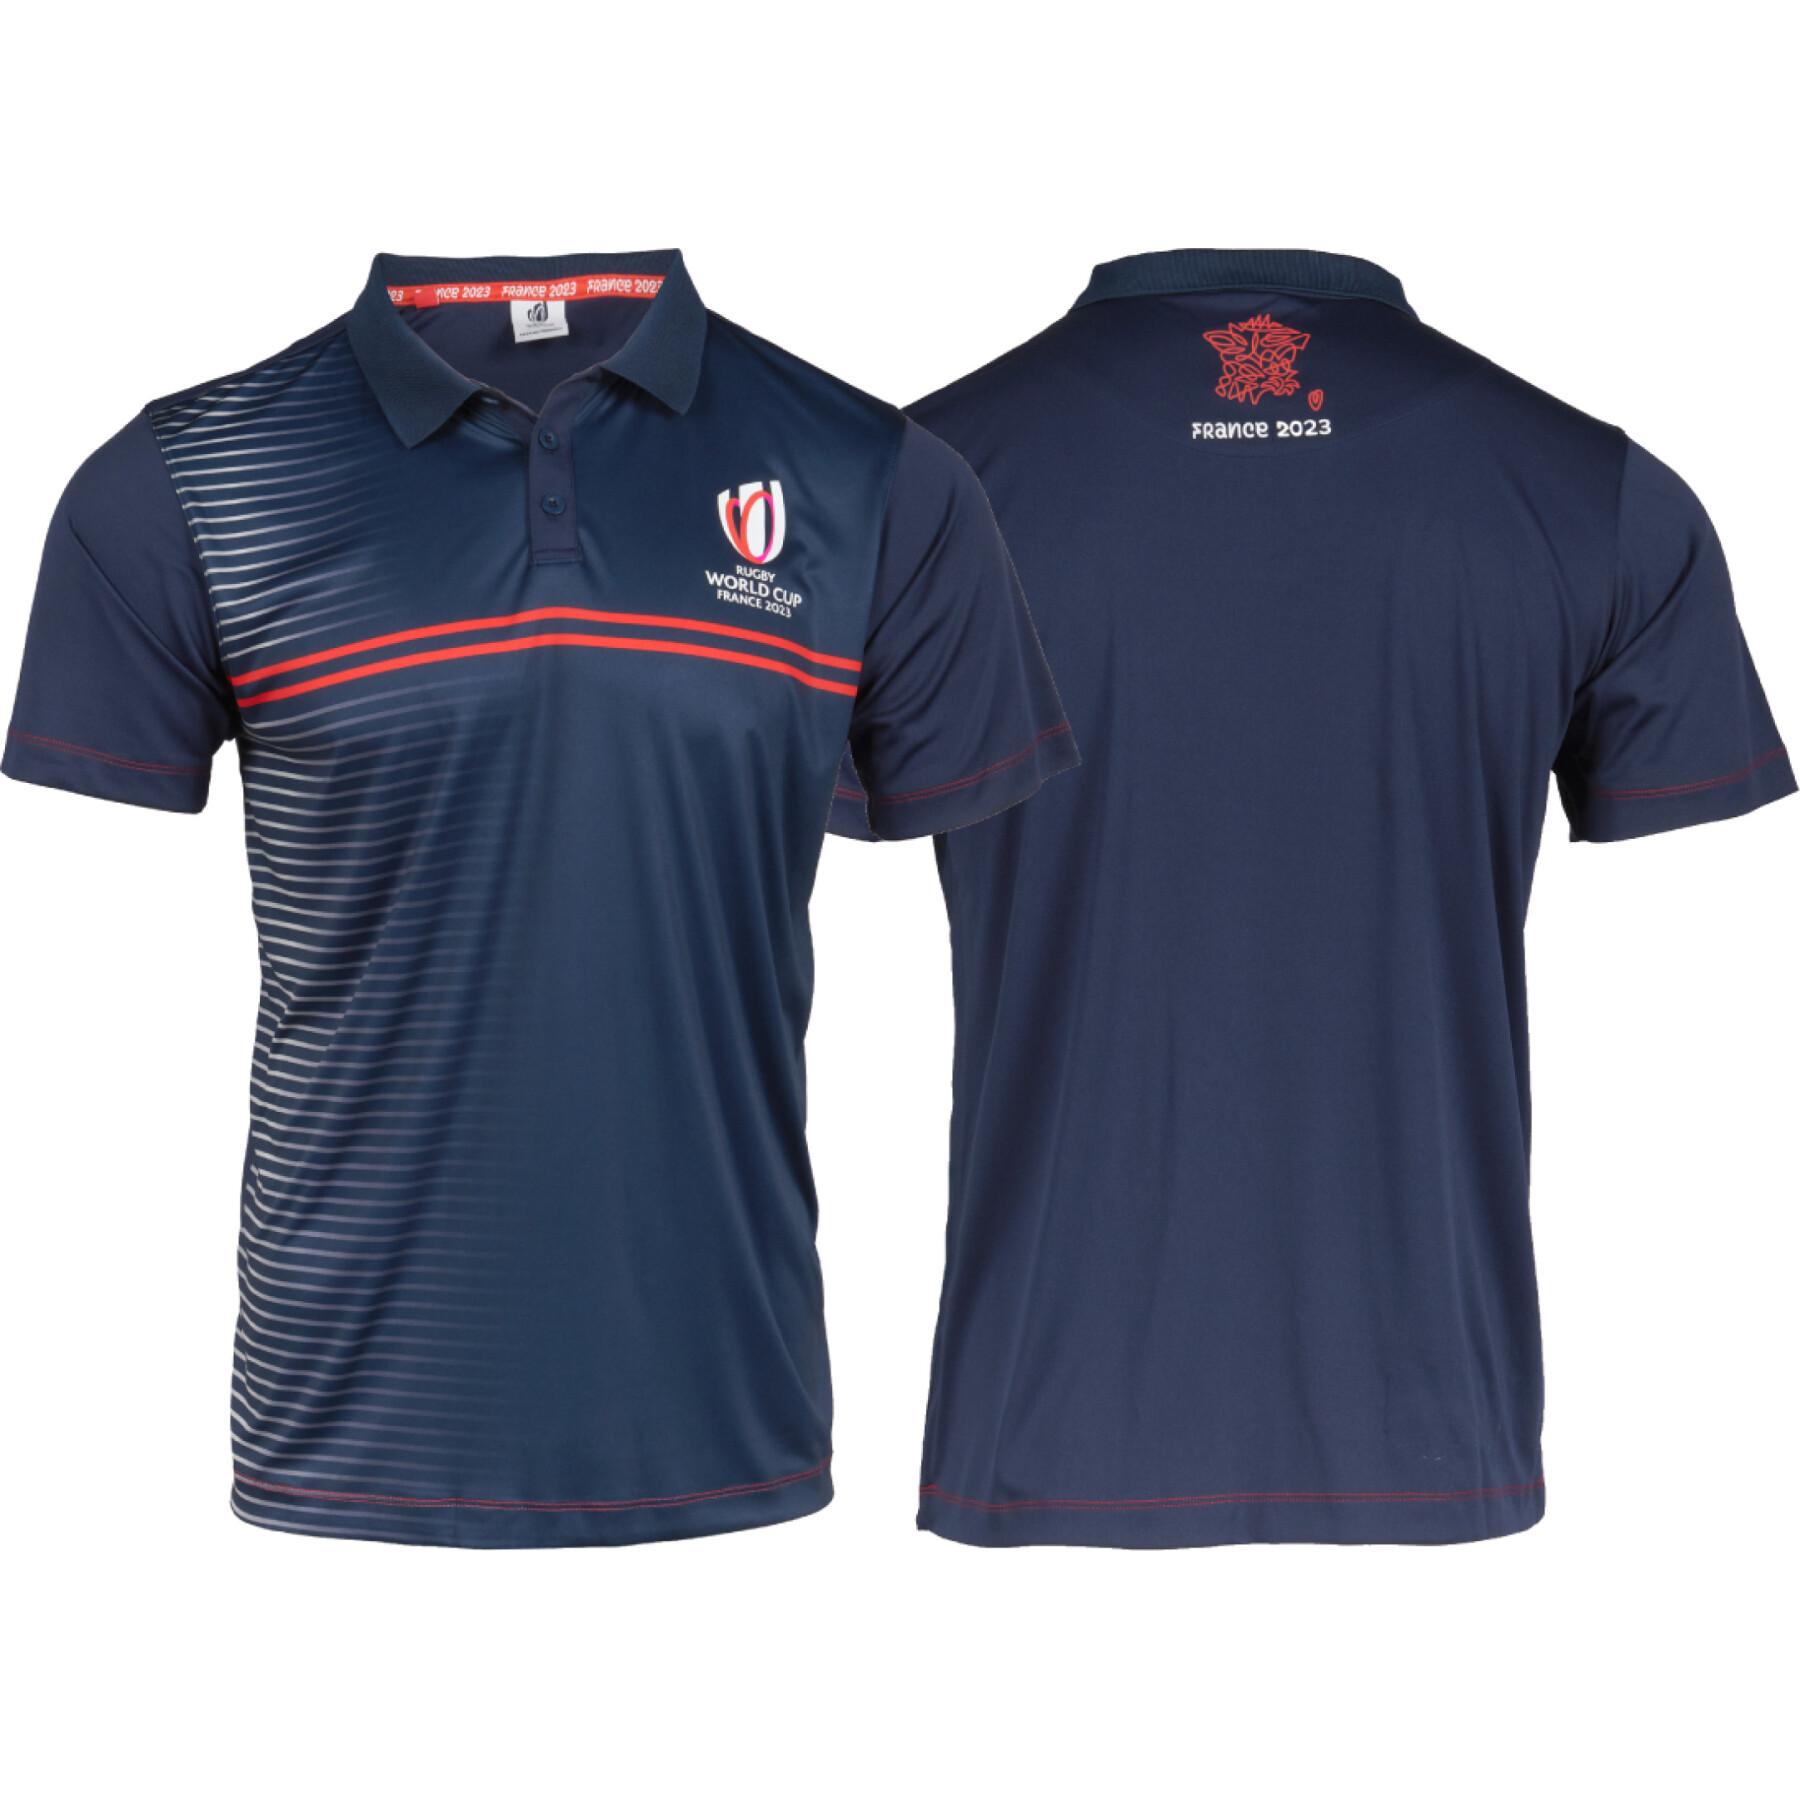 Rugby world cup jersey france 2023